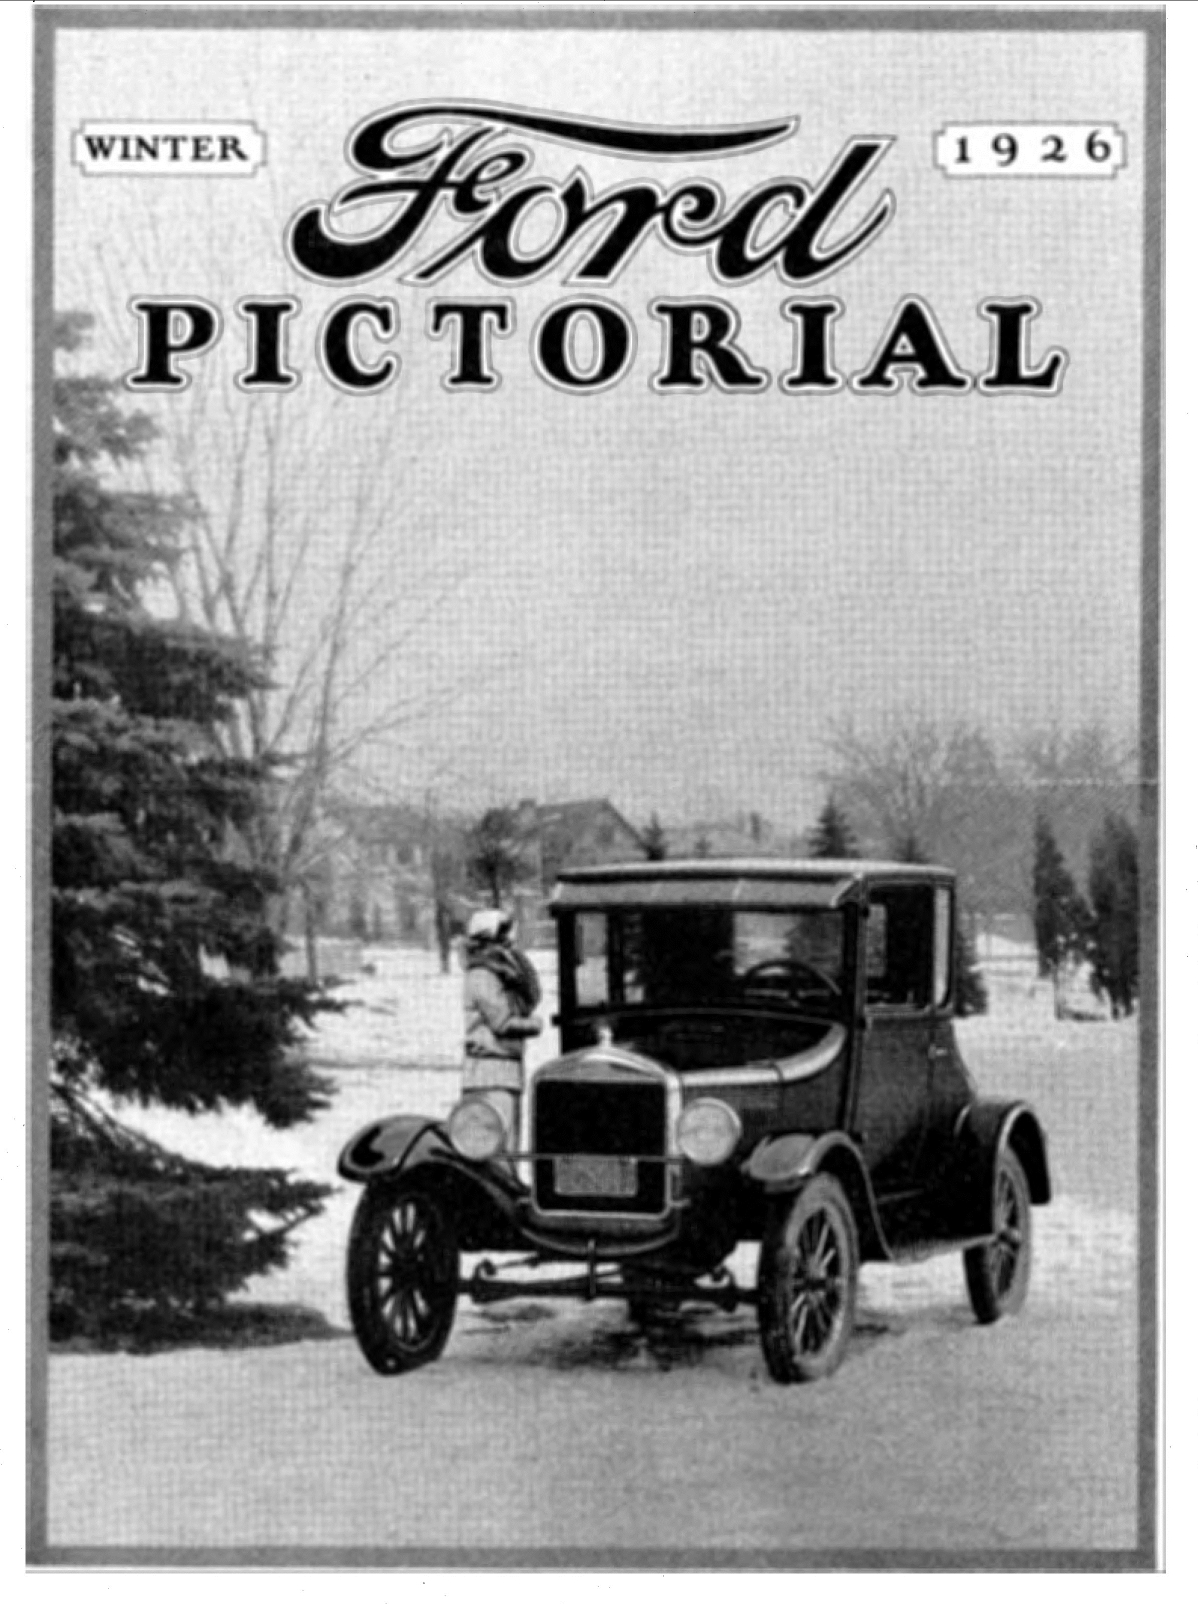 1926_Ford_Pictorial-04-1